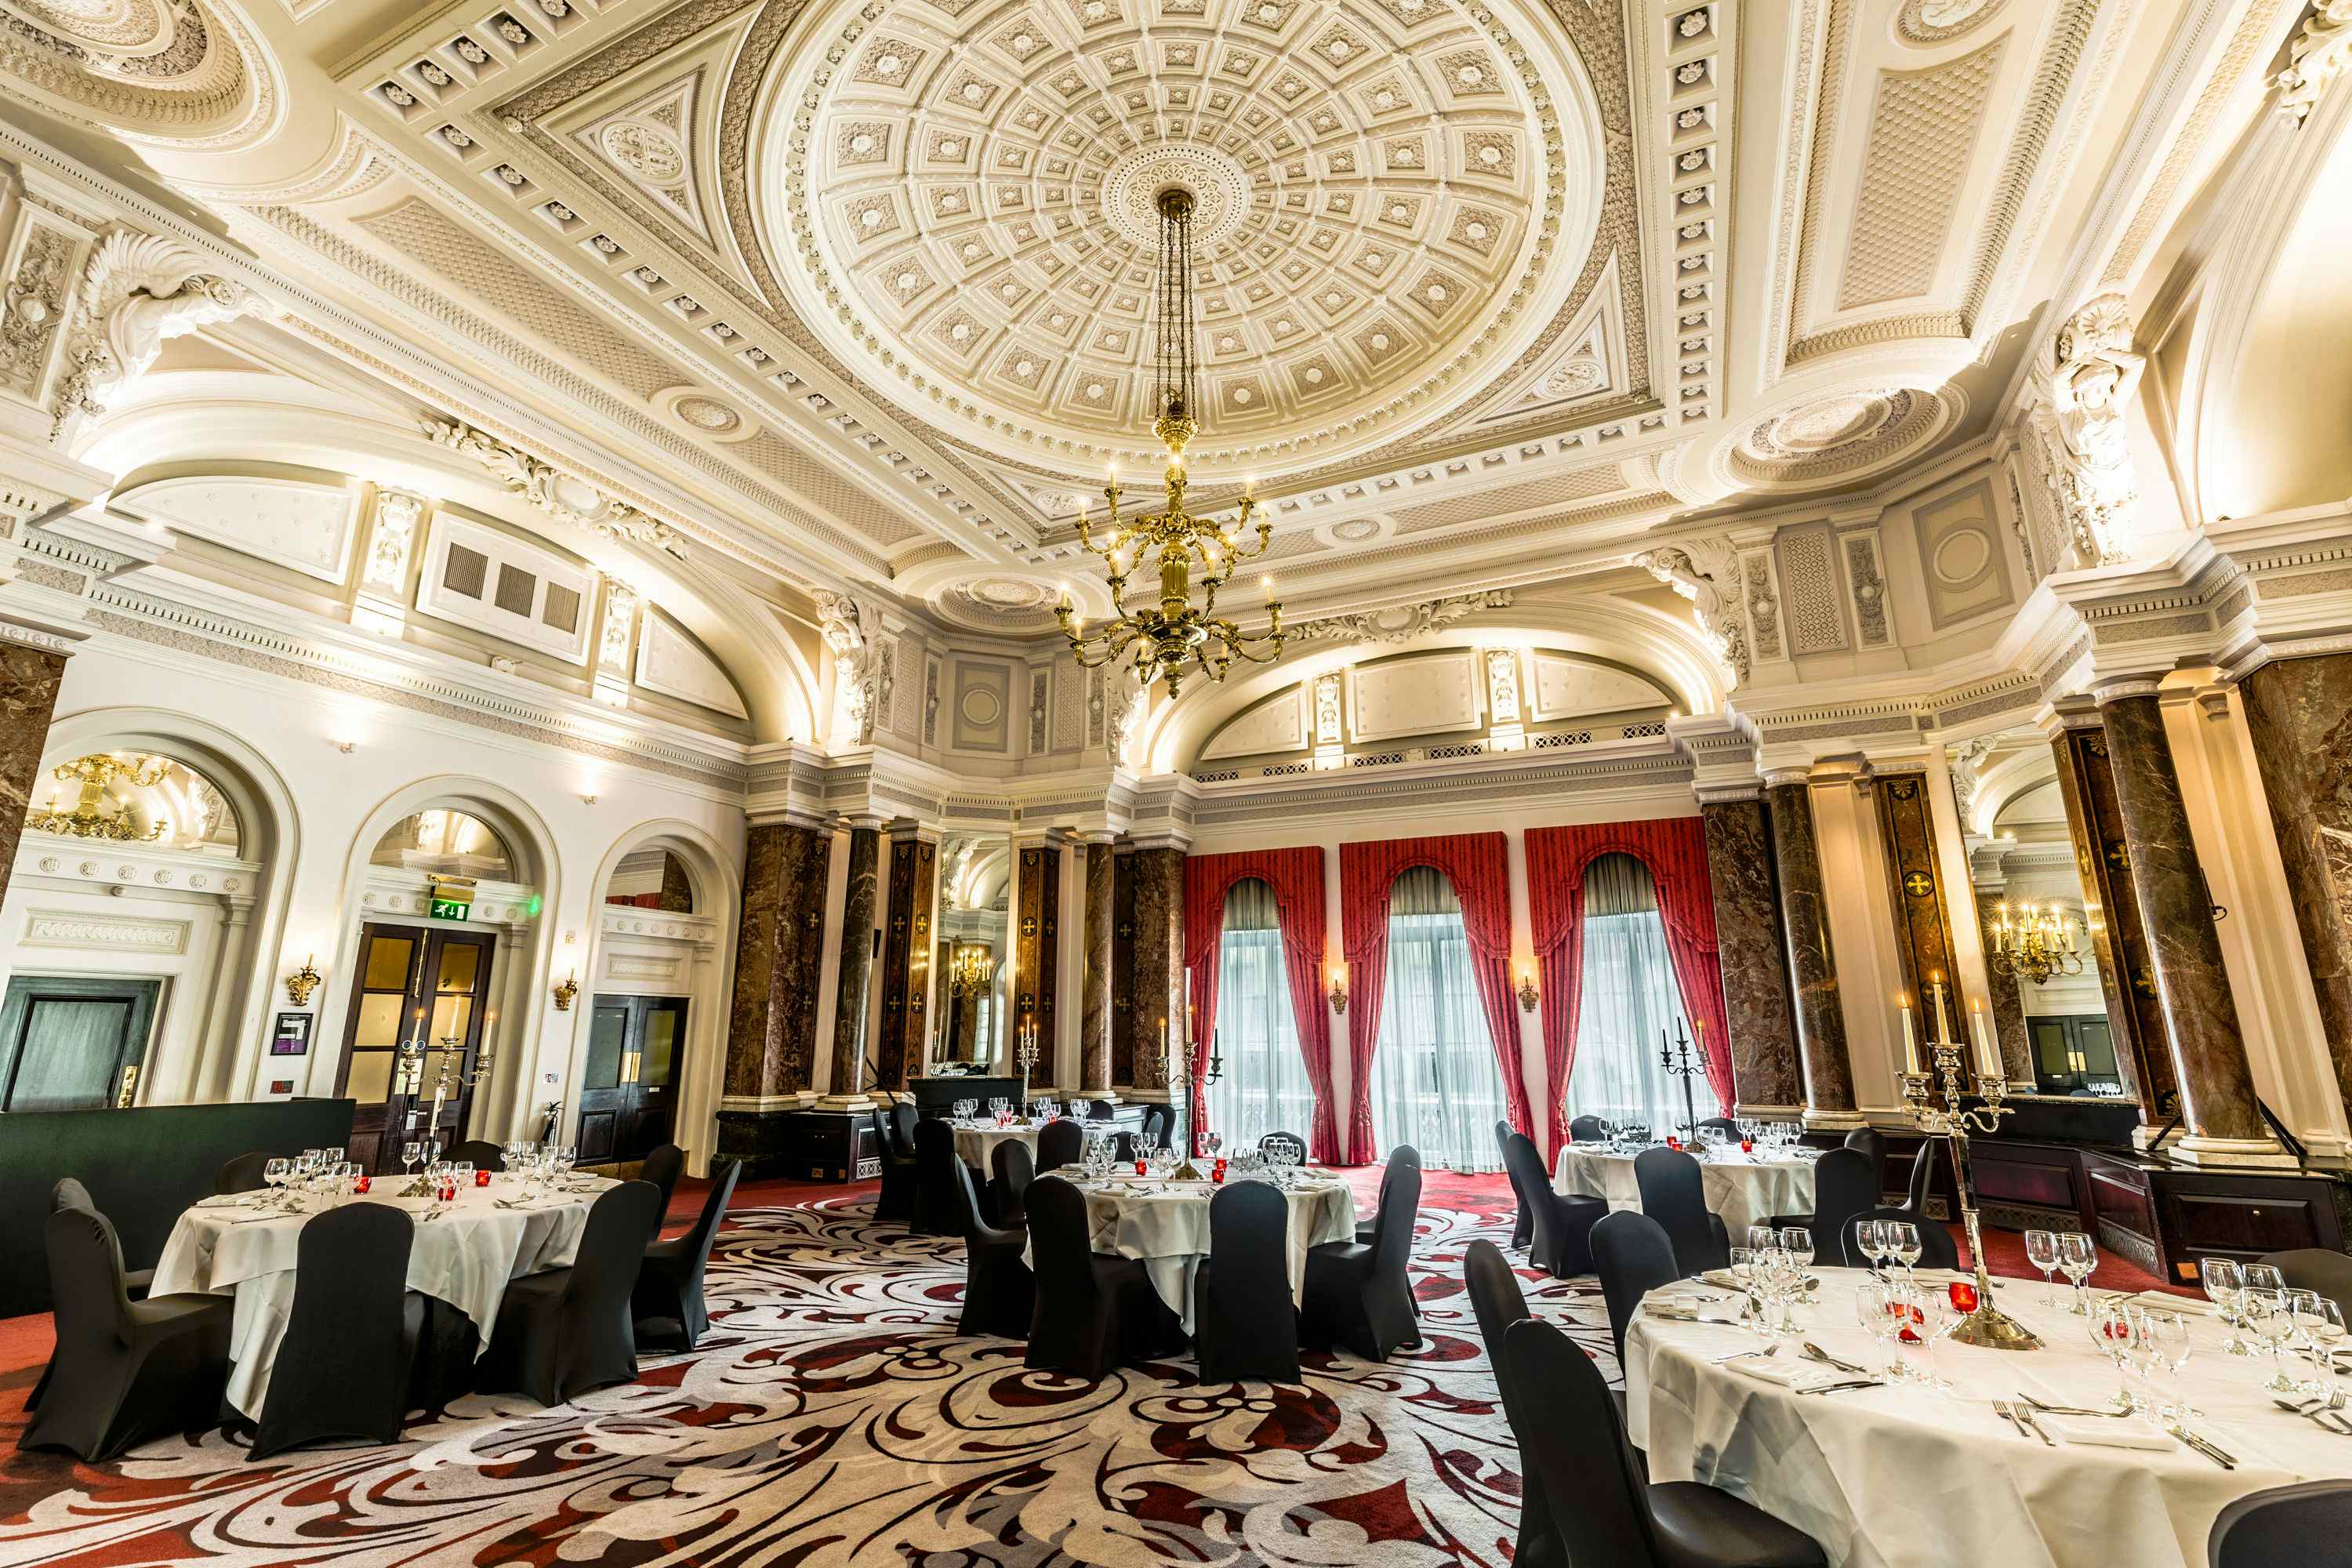 Book The Ballroom at The Clermont Charing Cross. A London Venue for